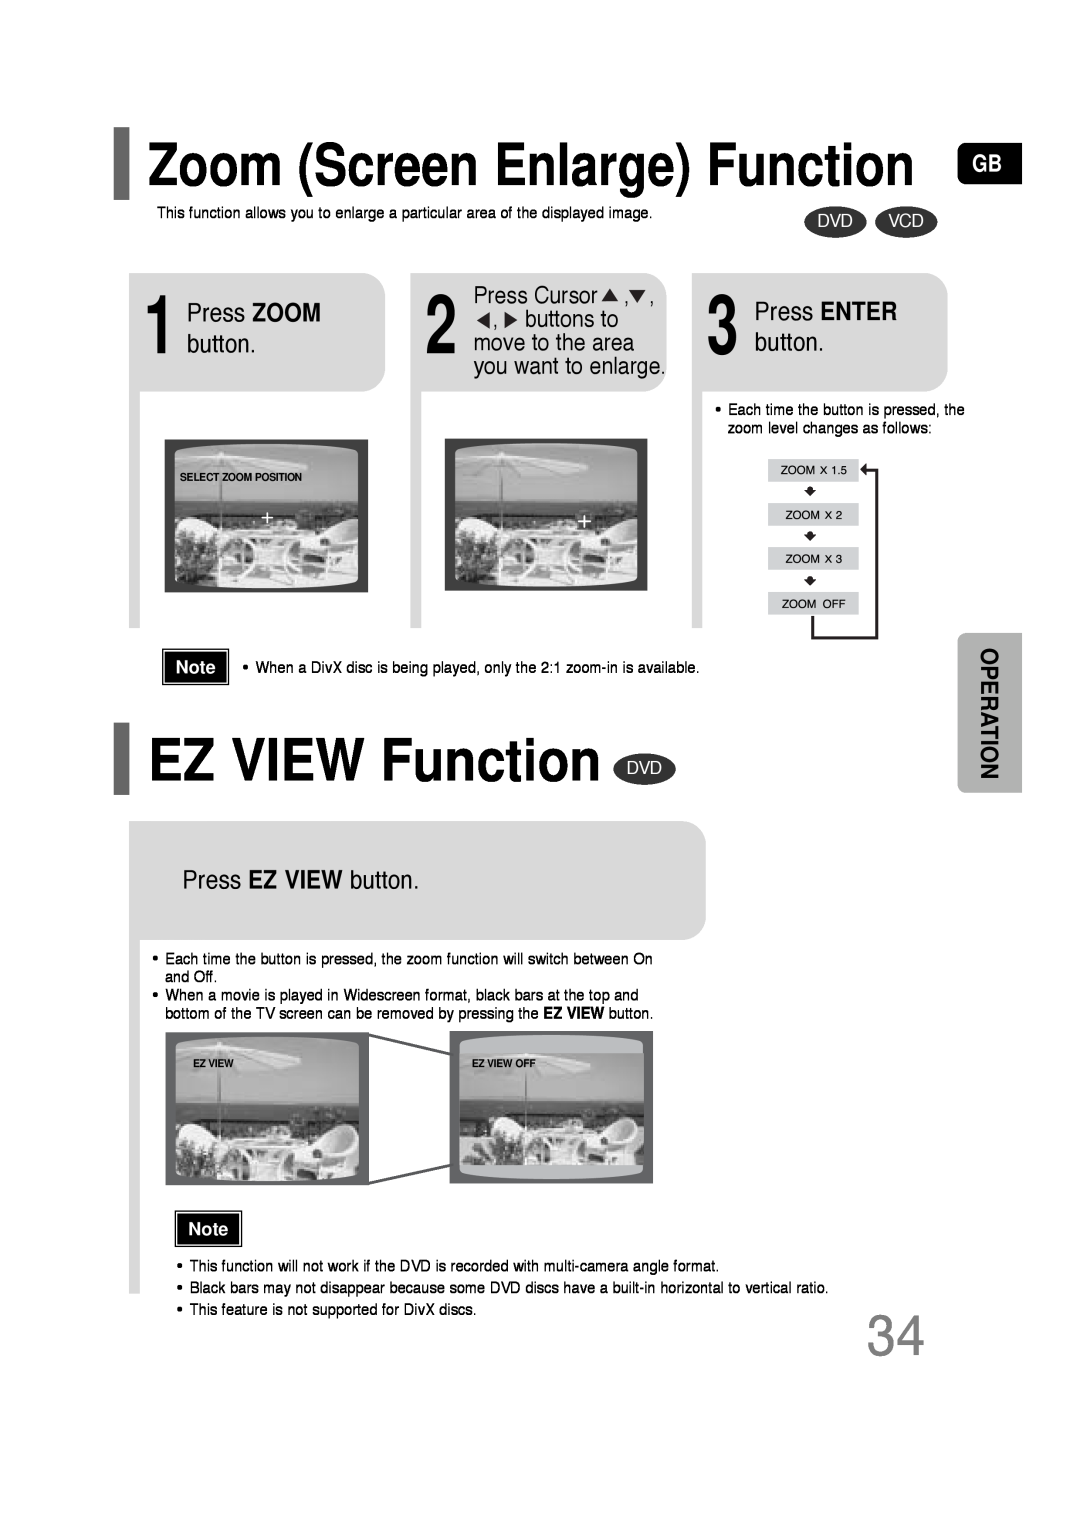 Samsung HT-TQ22 EZ VIEW Function DVD, Zoom Screen Enlarge Function GB, Press EZ VIEW button, Press ZOOM button, Operation 